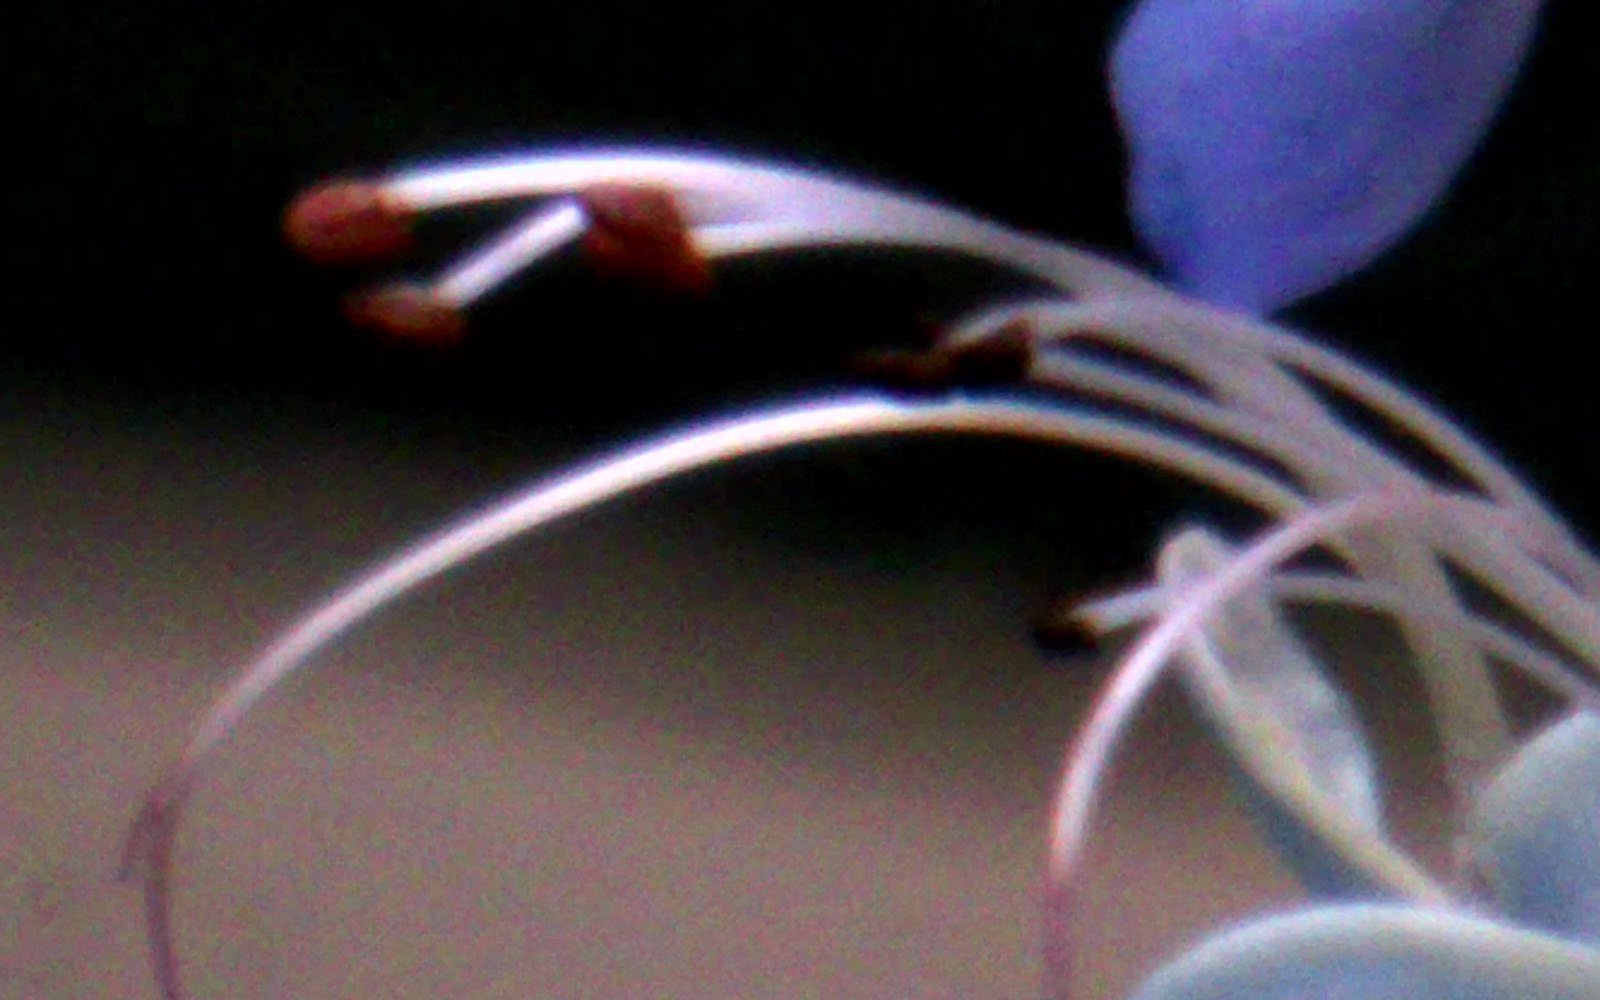 A close-up, blurry image of delicate flower stamens with slender filaments and small, dark brown anthers, contrasted against a soft blue petal background.